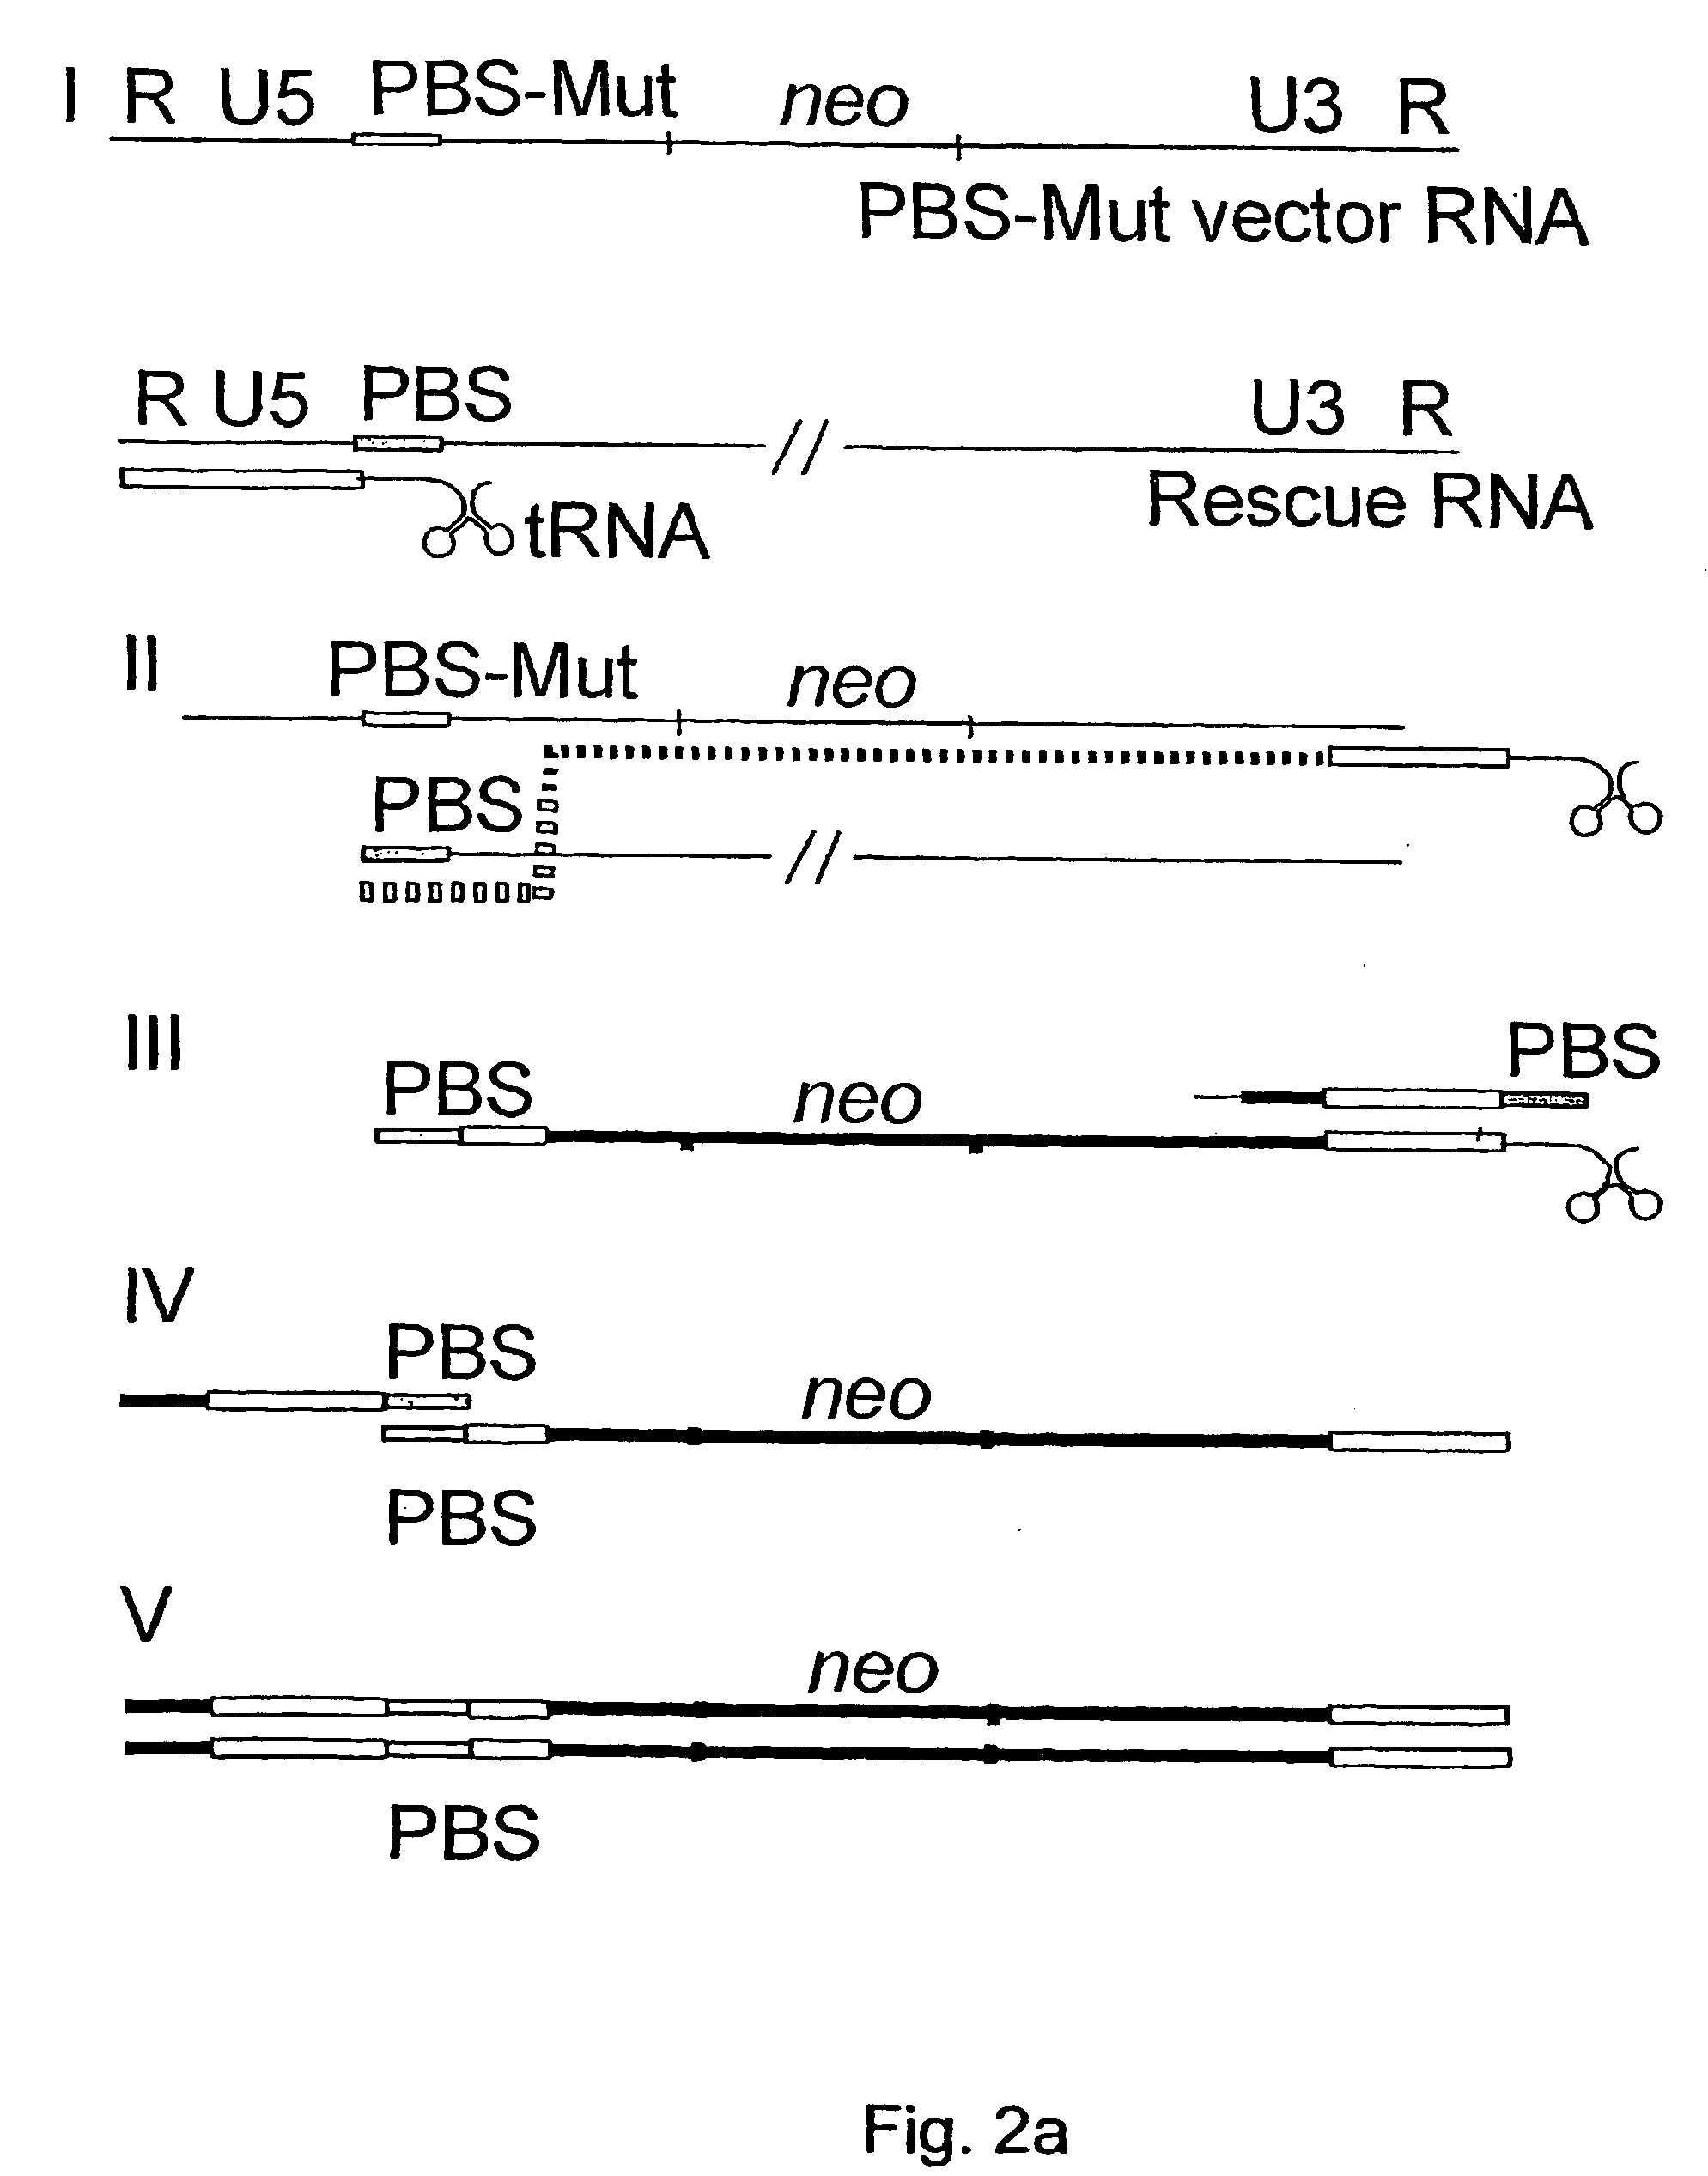 Vectors for gene therapy